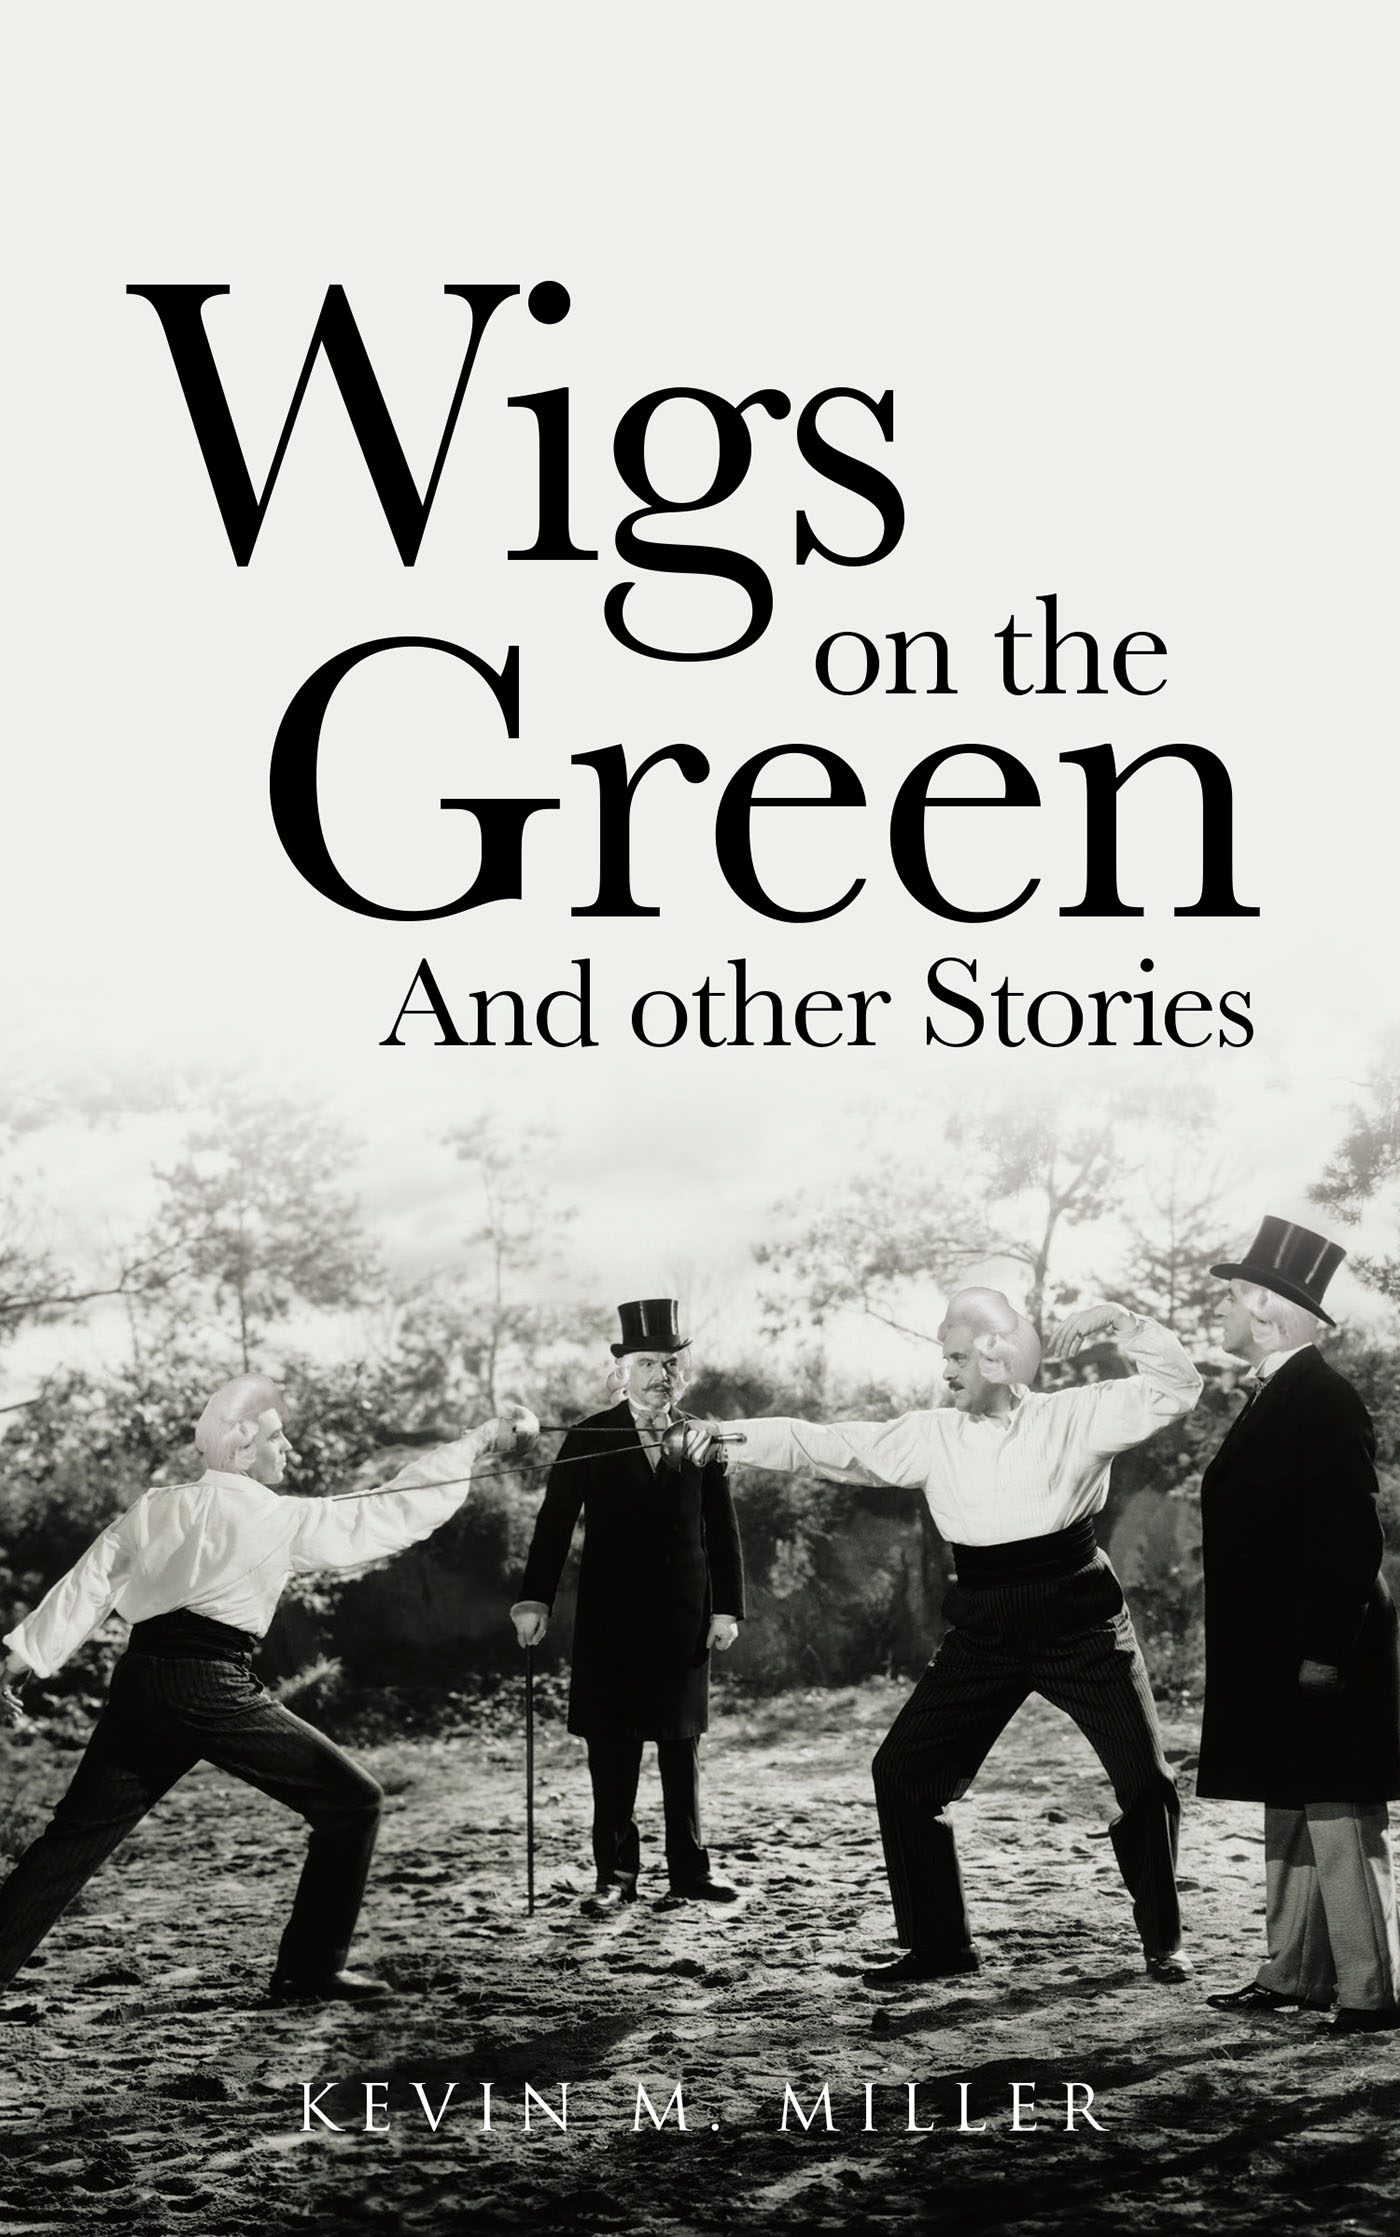 Author Kevin Miller’s New Book, "Wigs on the Green: And Other Stories," is an Enthralling Collection of Historical Fiction Shorts Covering Little-Known Subjects